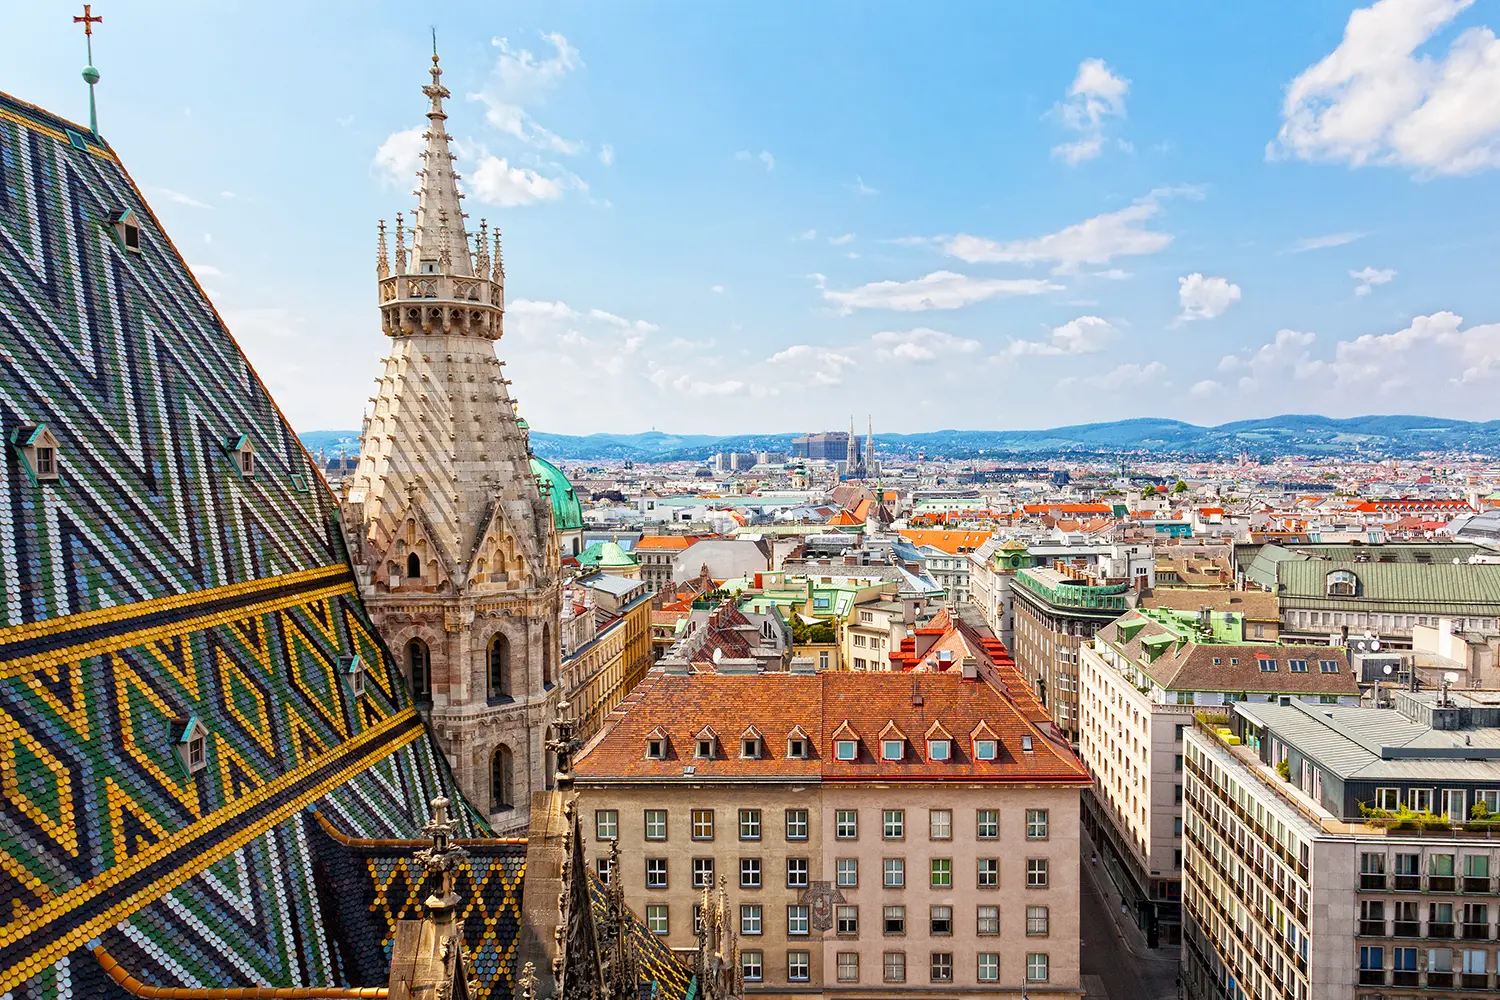 View from the St. Stephen’s Cathedral in Vienna, Austria